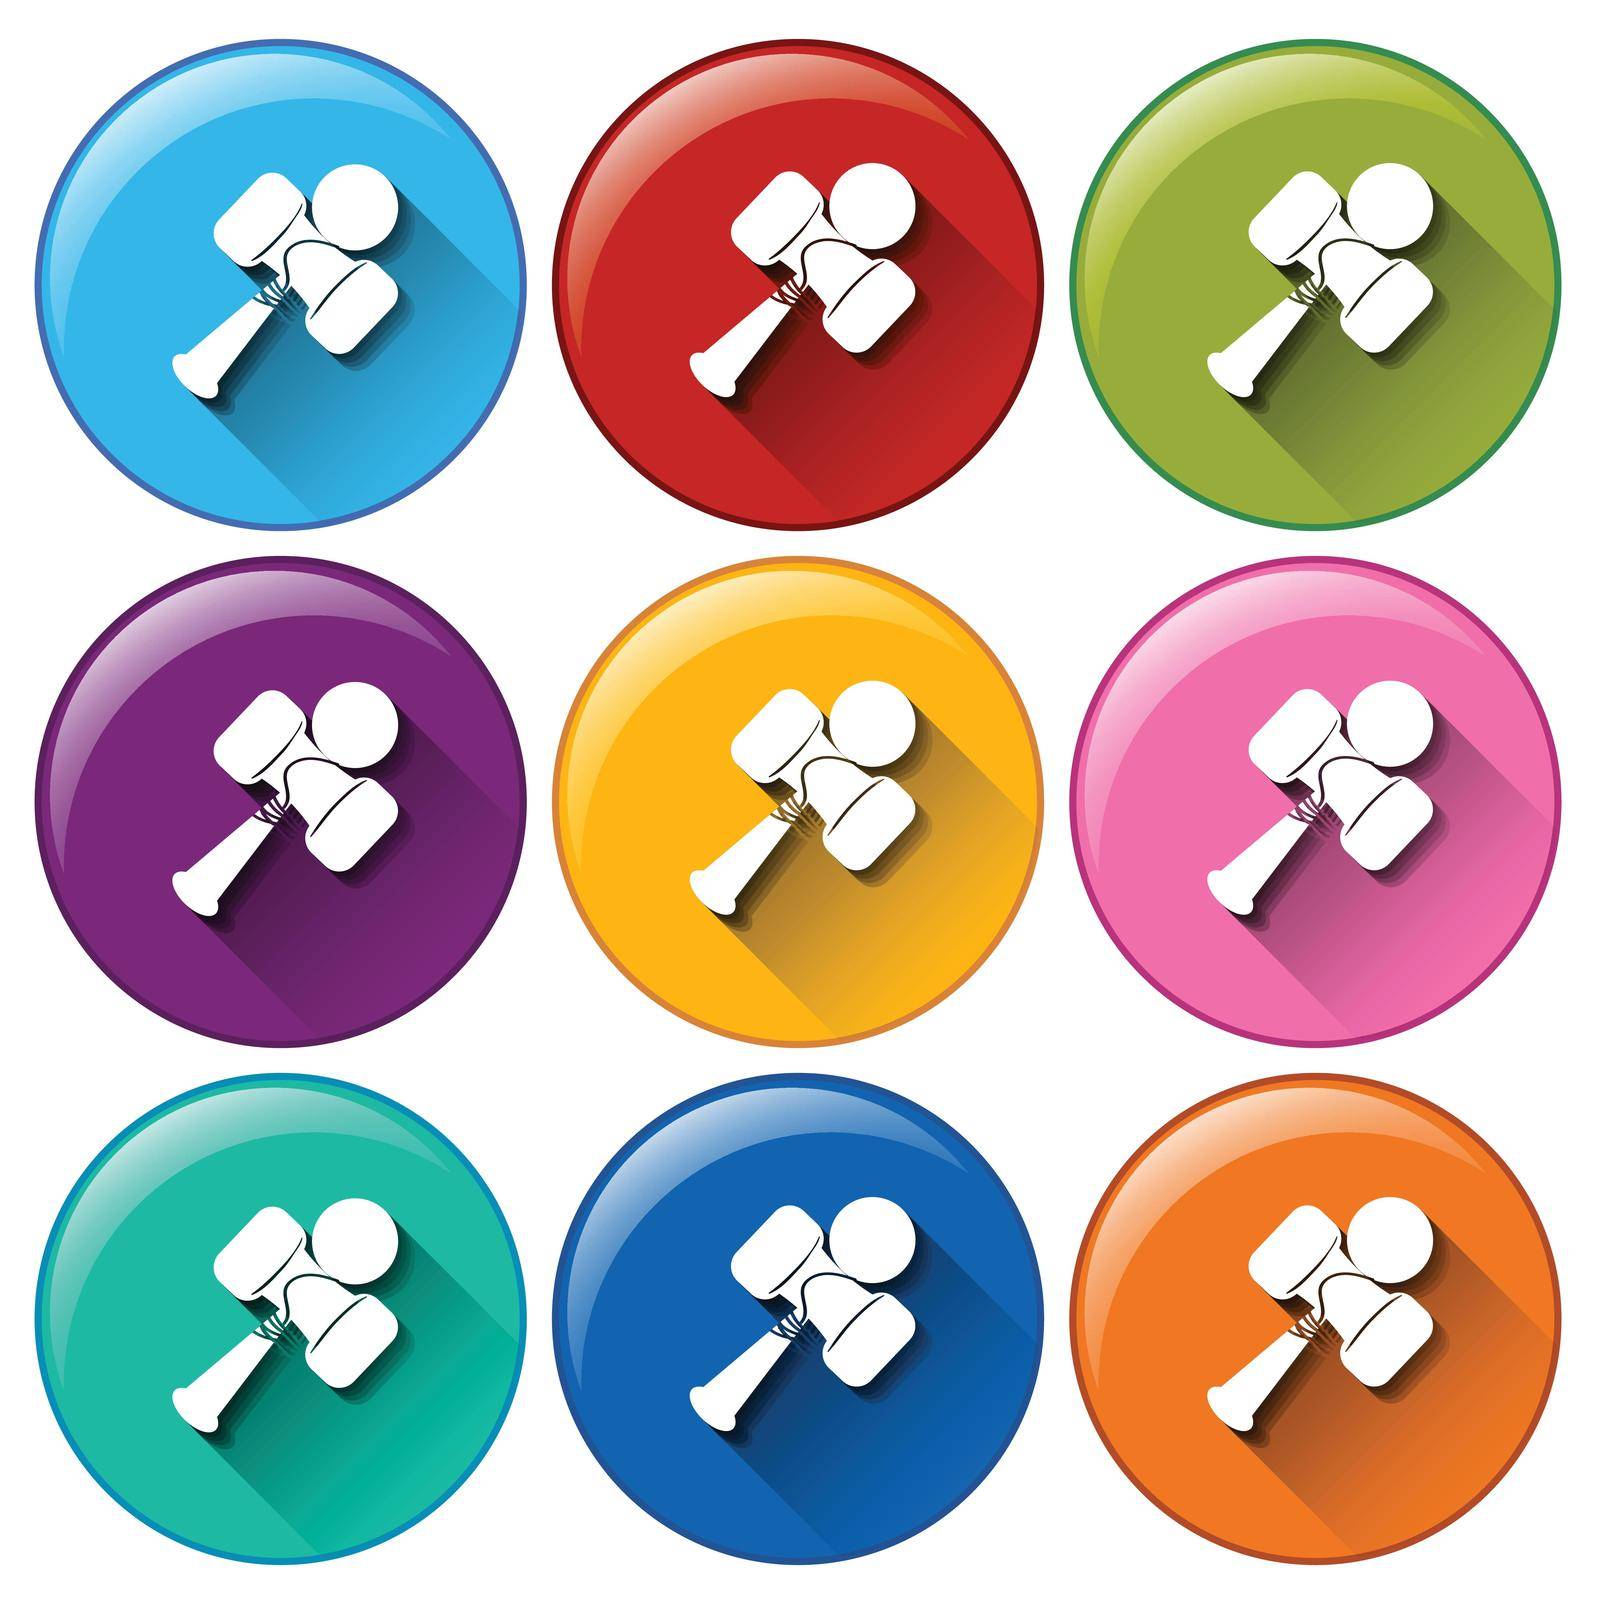 Illustration of the rounded buttons with toys on a white background